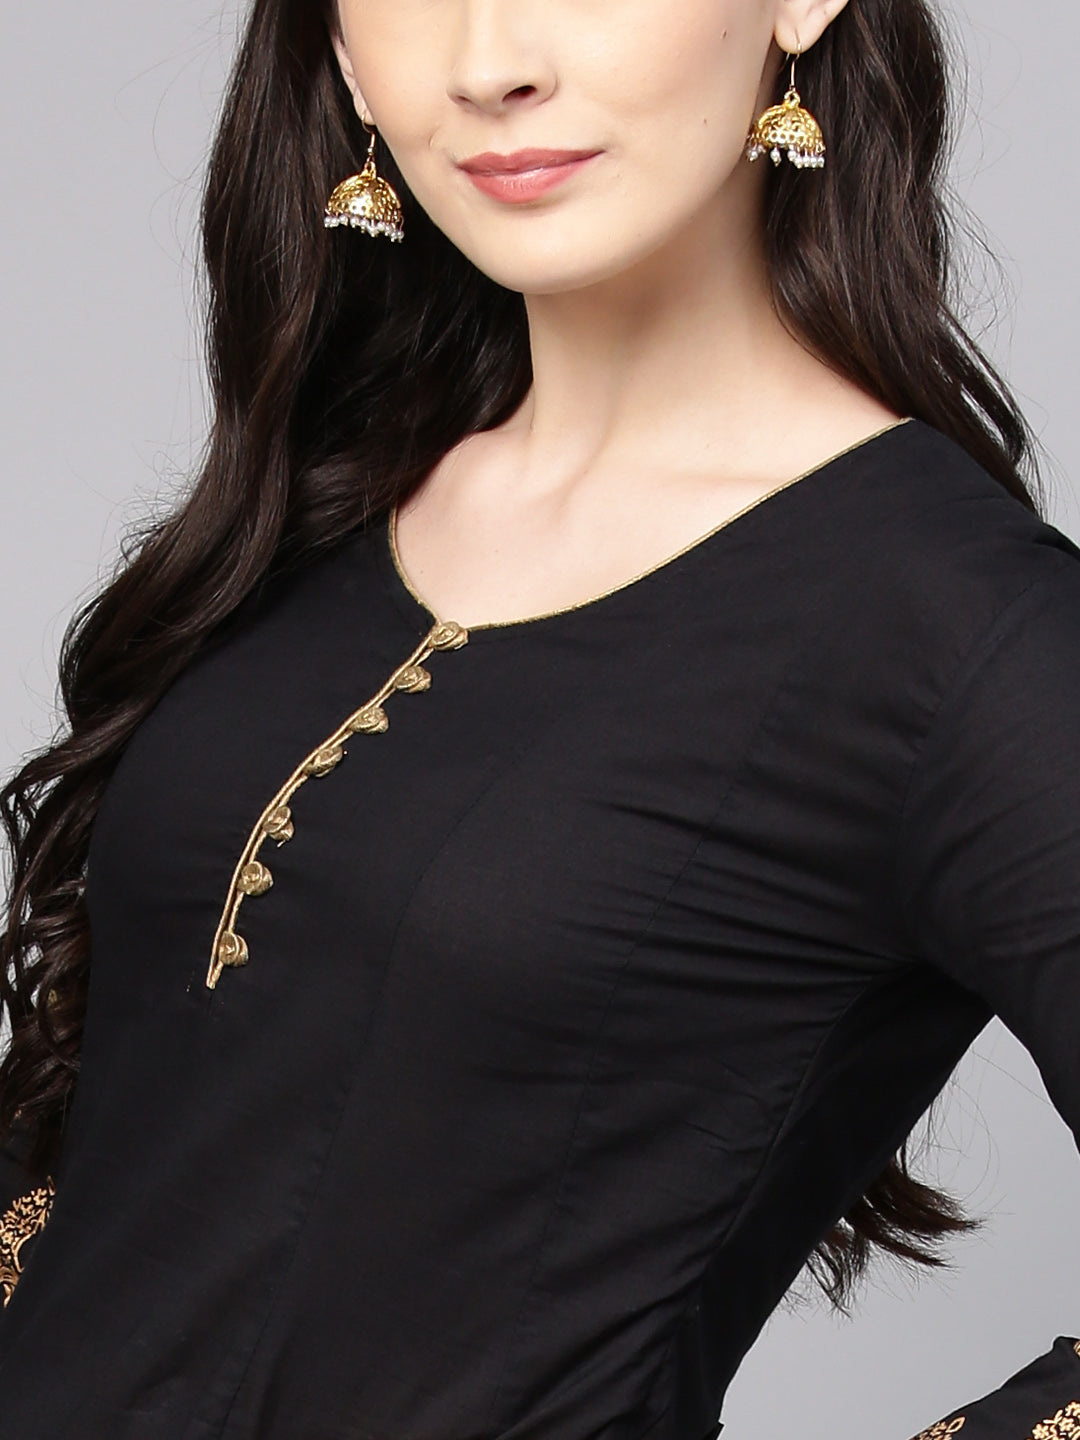 Bhama Couture Women Black & Golden Solid Kurta with Palazzos